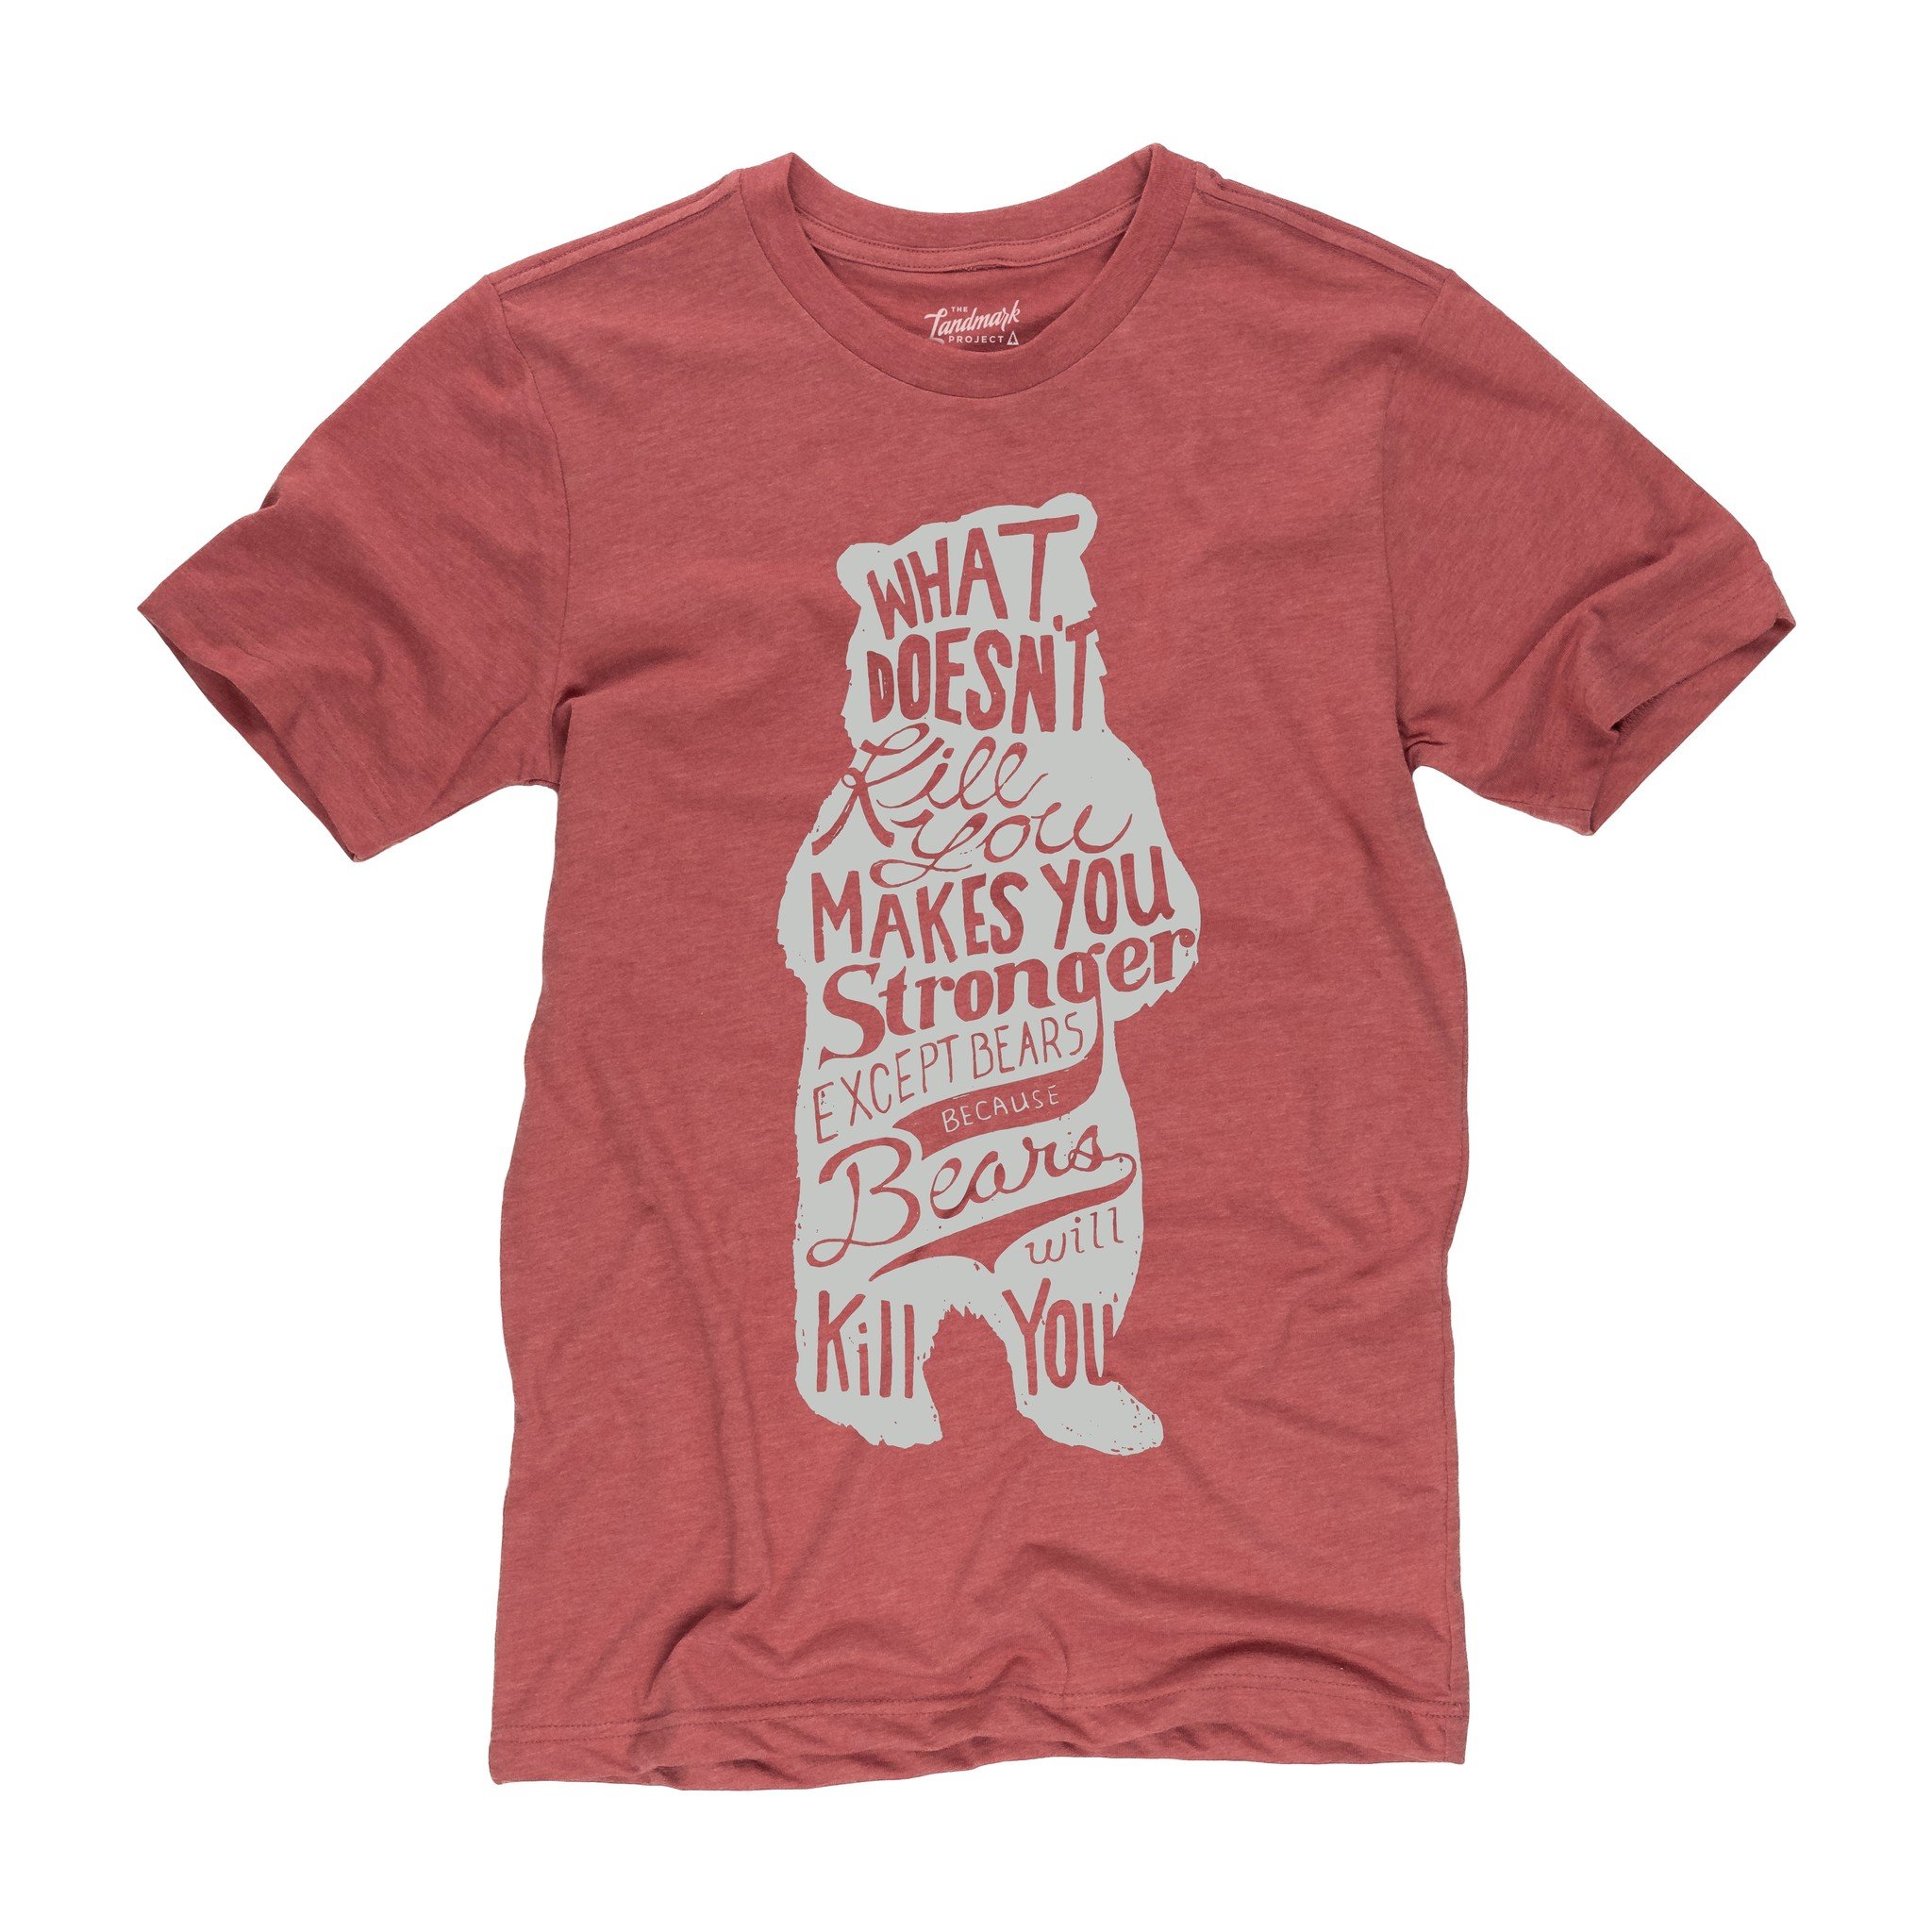 The Landmark Project What doesn't kill you makes you stronger, except bears, because bears will kill you!  Unisex Tee Shirt